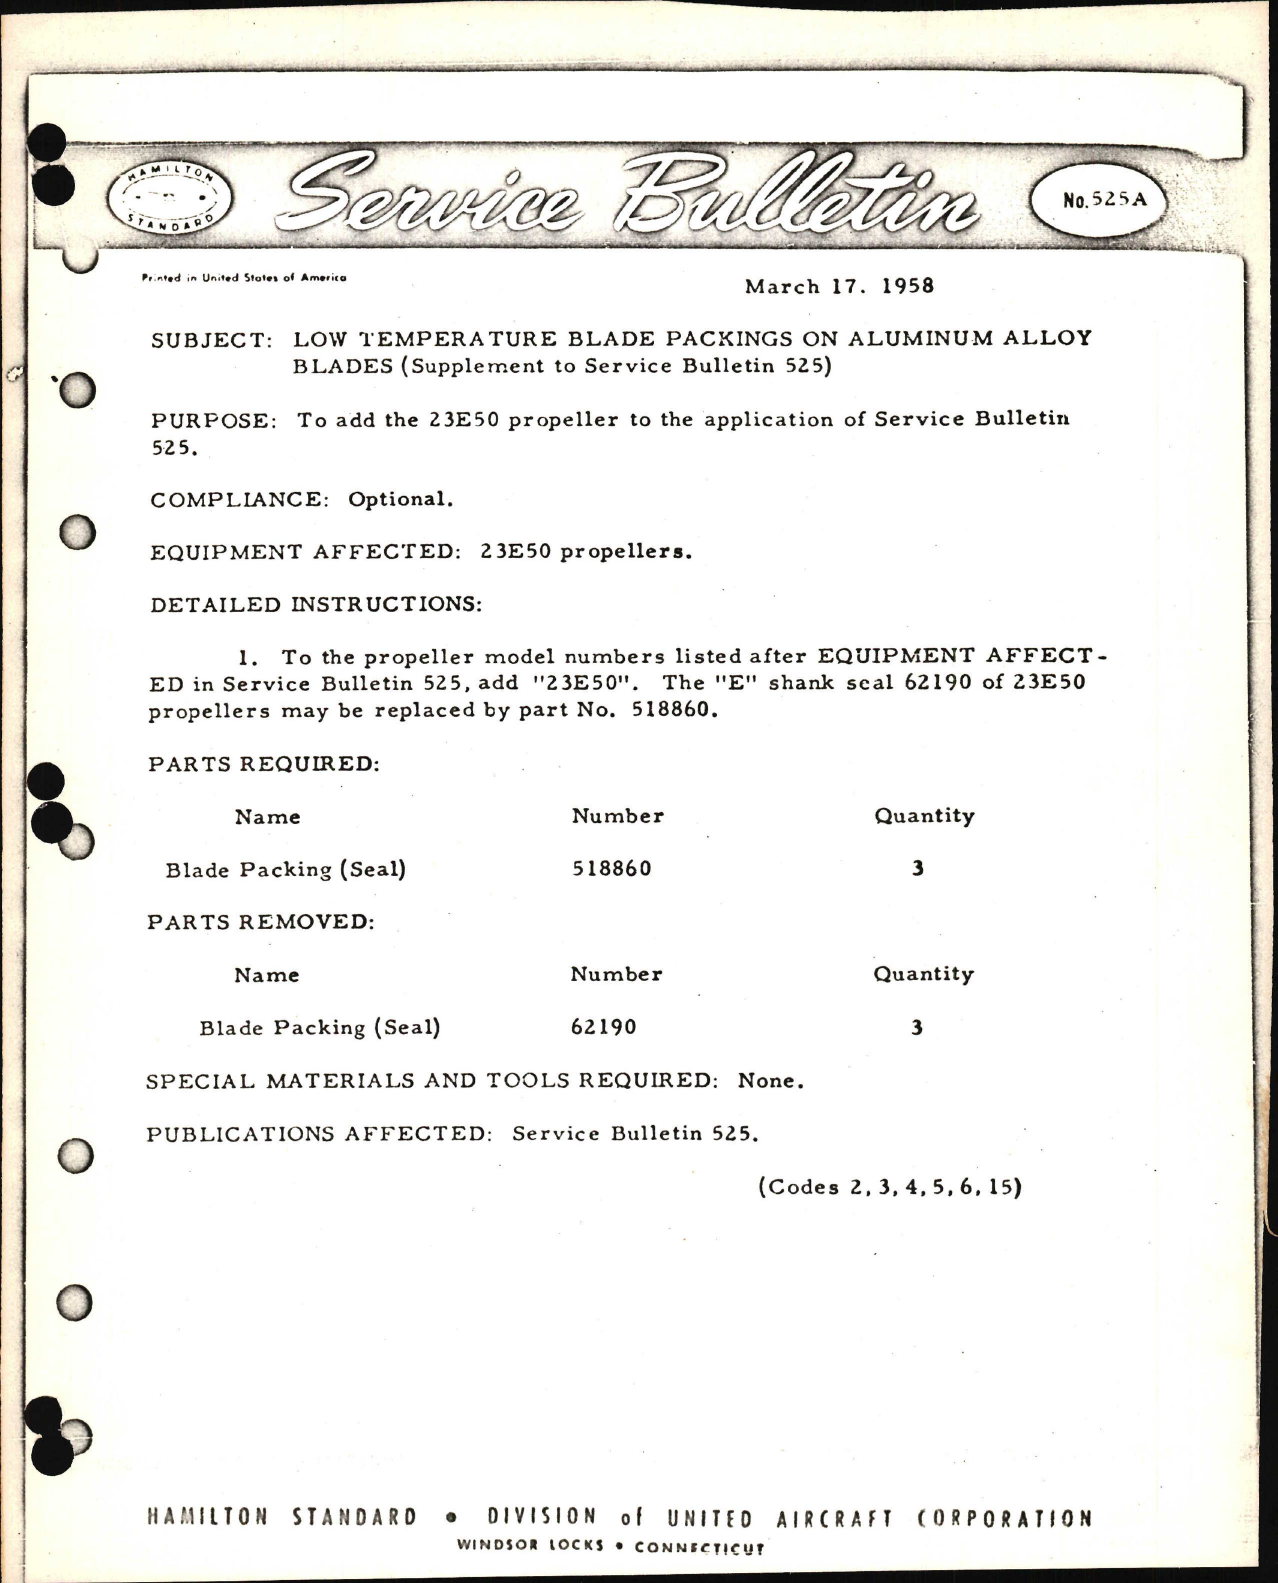 Sample page 1 from AirCorps Library document: Low Temperature Blade Packings on Aluminum Alloy Blades